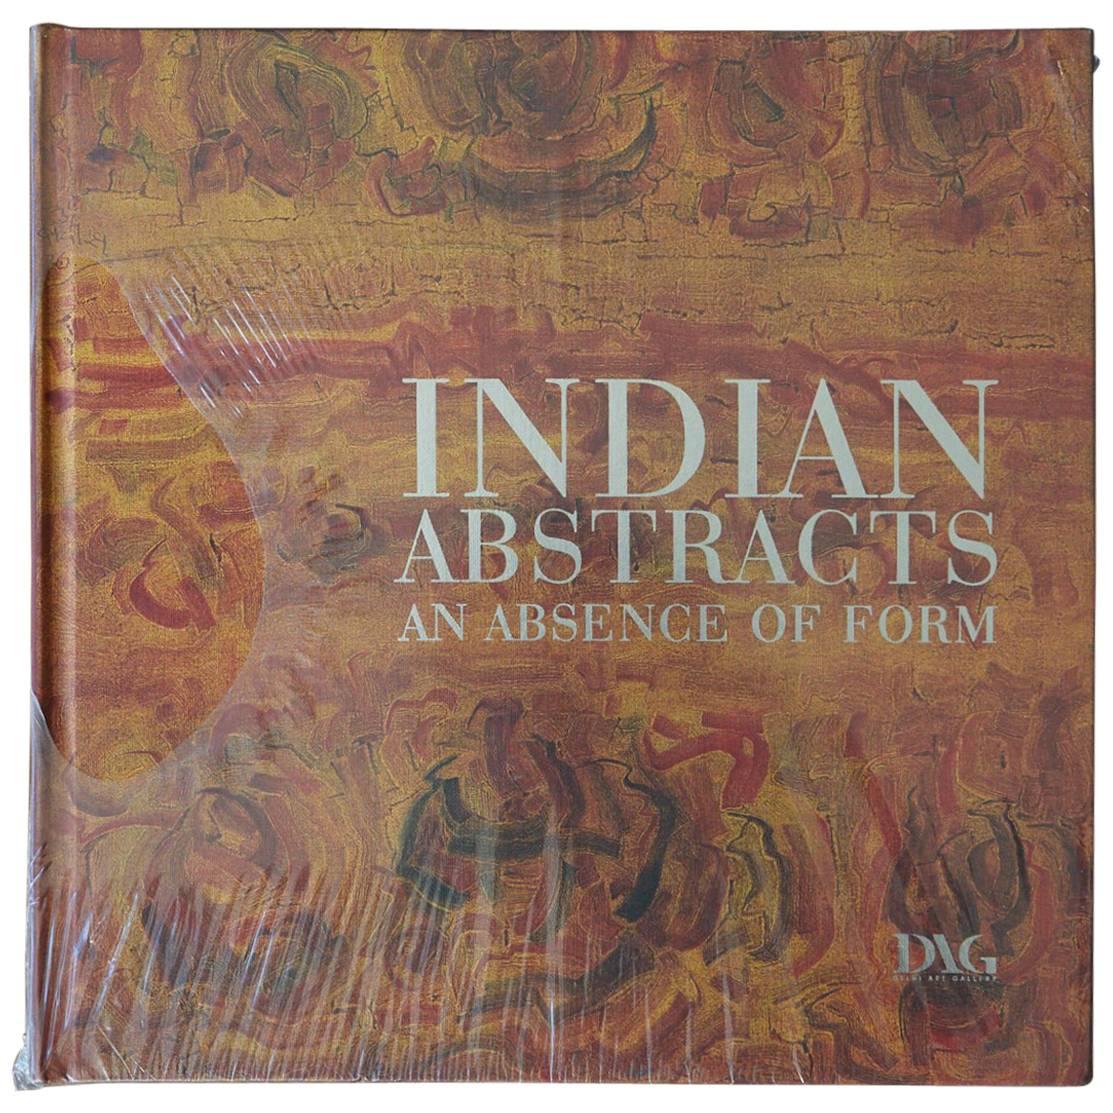 Indian Abstracts, an Absence of Form by Ashish Anand, Delhi Art Gallery, New